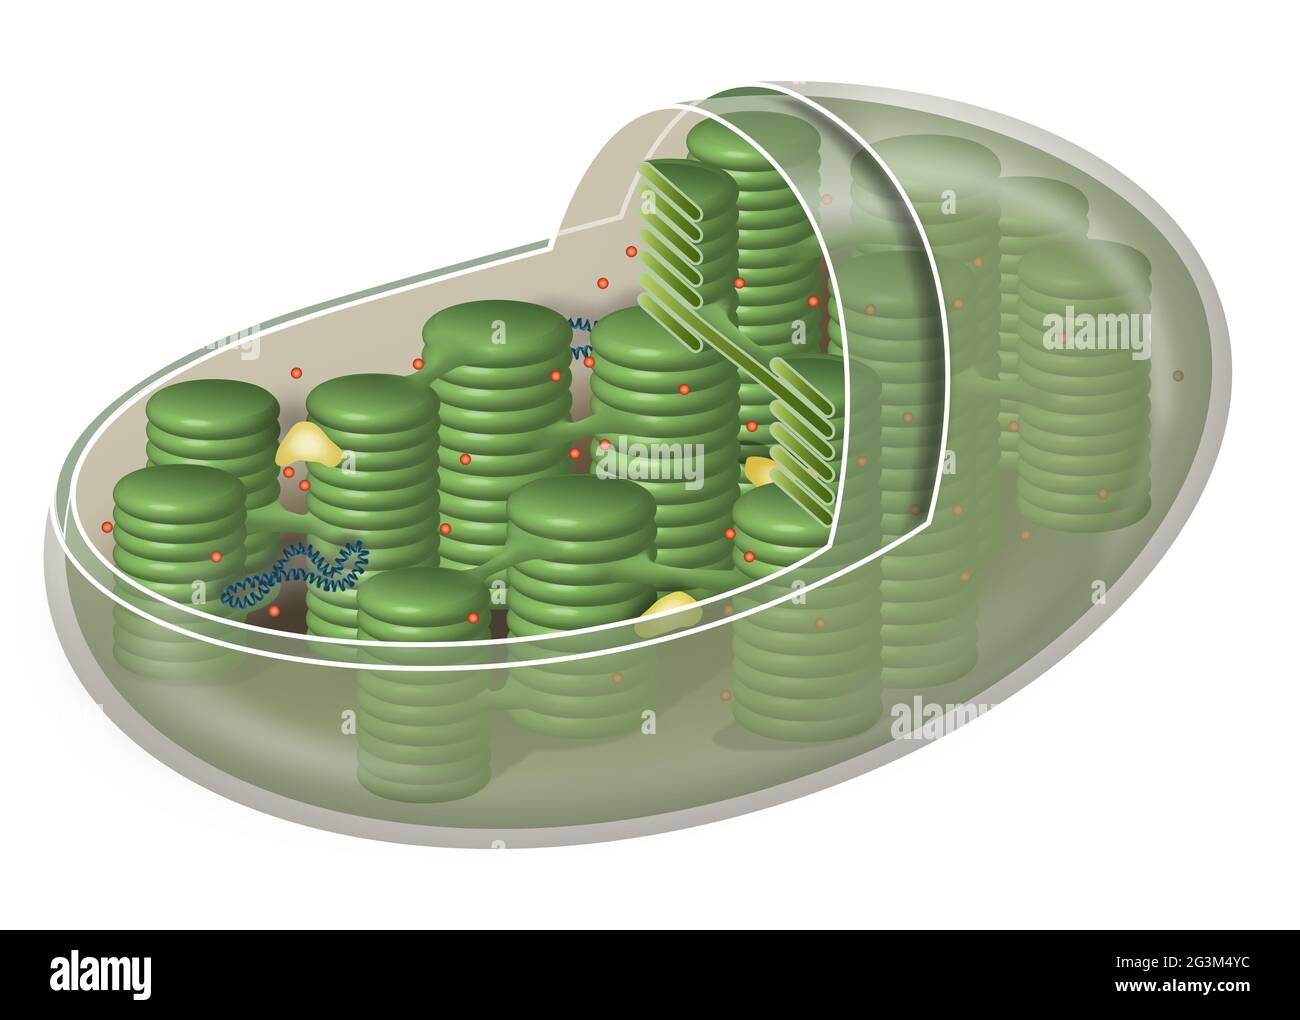 Chloroplast, plant cell organelle Stock Photo